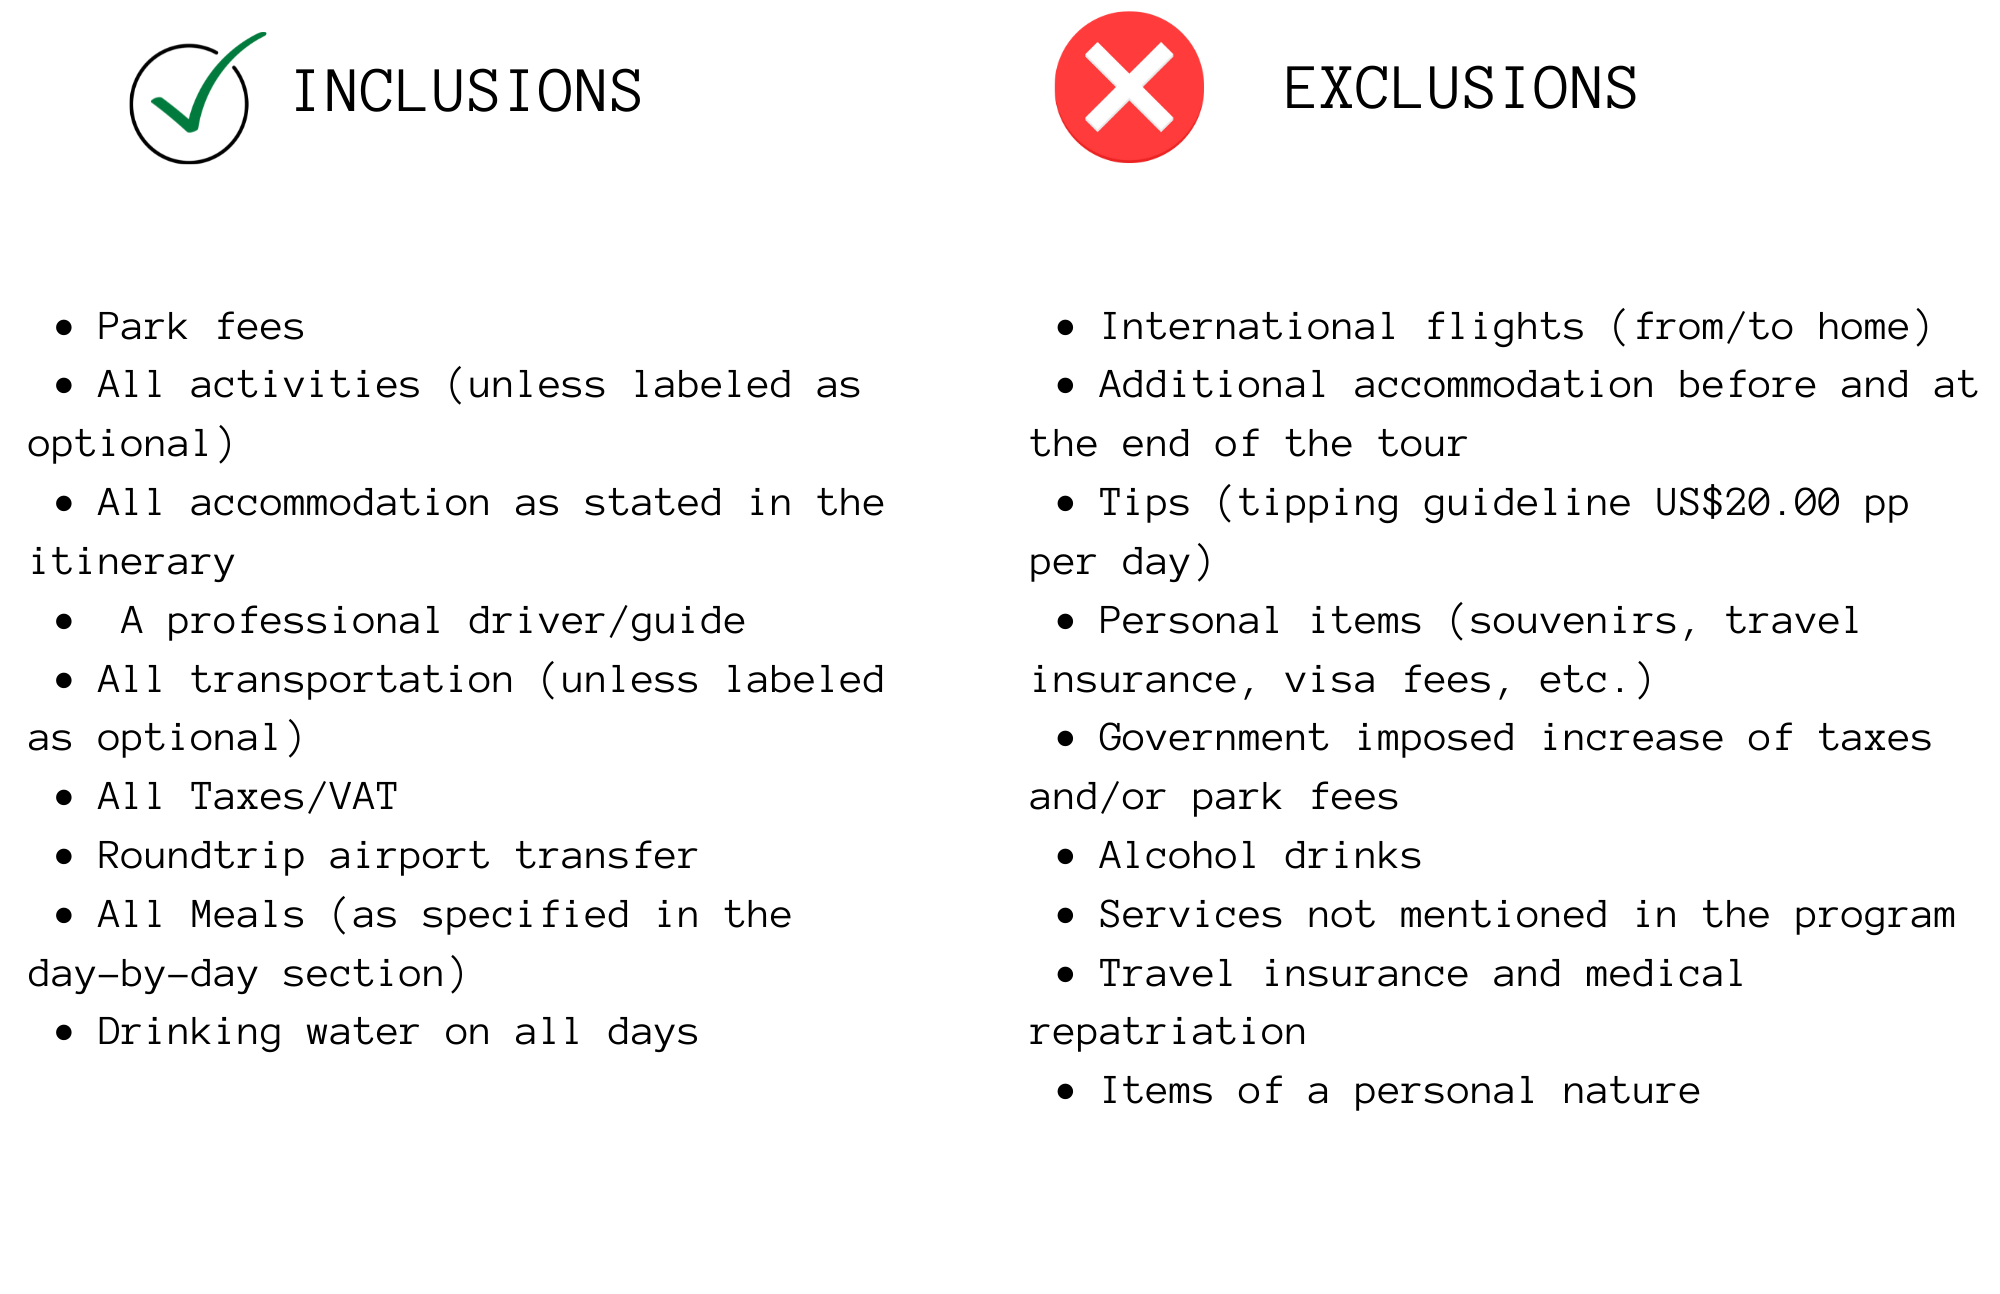 The list of inclusion on the left and exclusion on the right